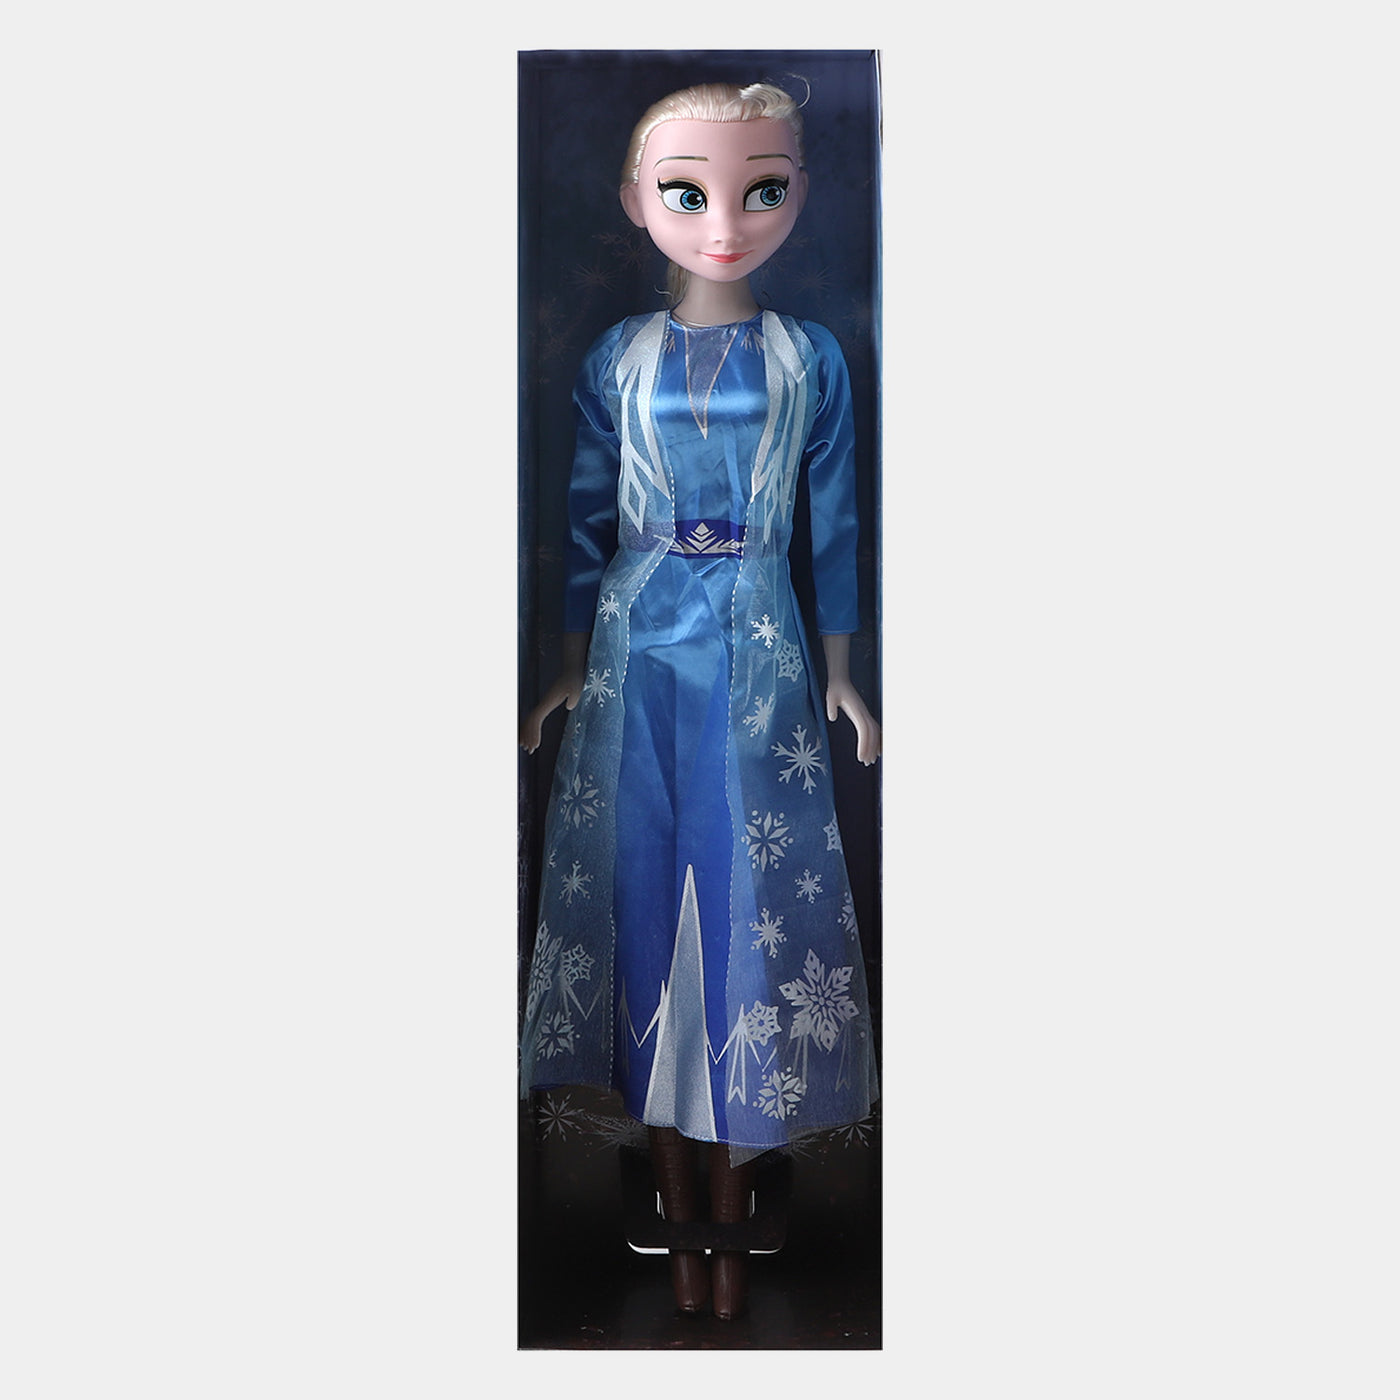 Cute Character Doll For Girls